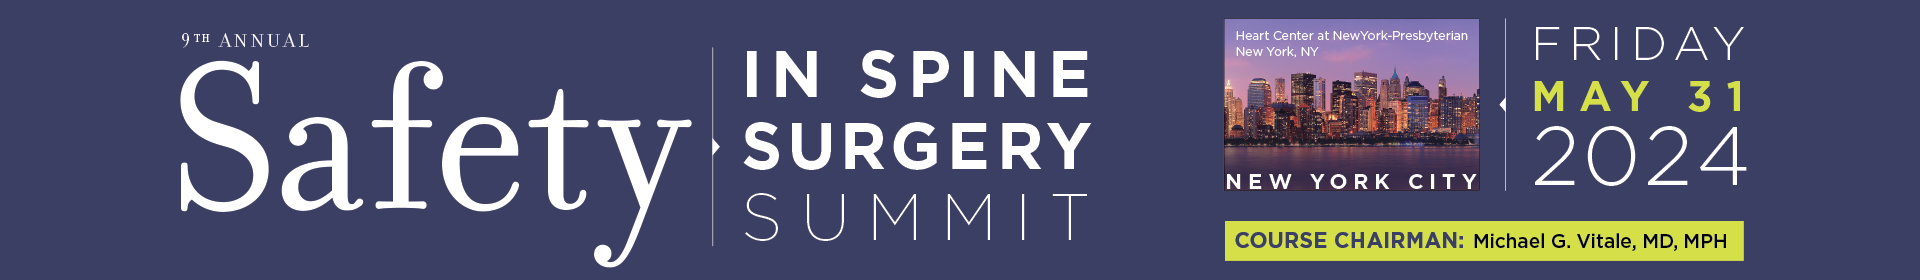 Safety in Spine Surgery Summit 2024 Event Banner